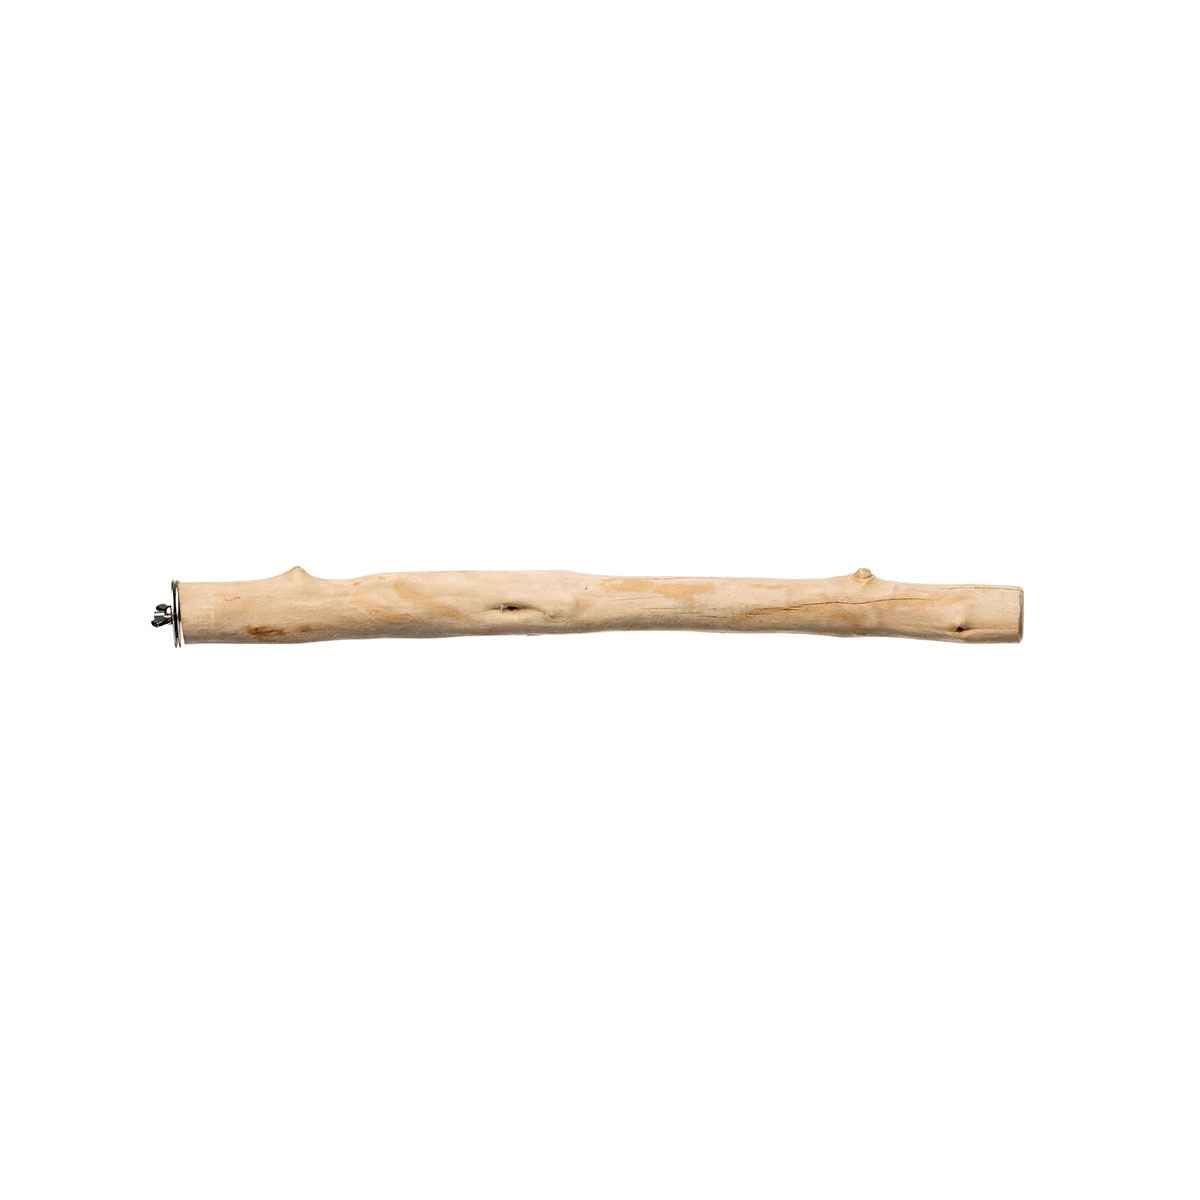 Prevue Pet Naturals 46cm Coffee Wood Straight Perch - 1042 | 30 Day Money Back Guarantee | Best Price Guarantee | Free Shipping On All Orders